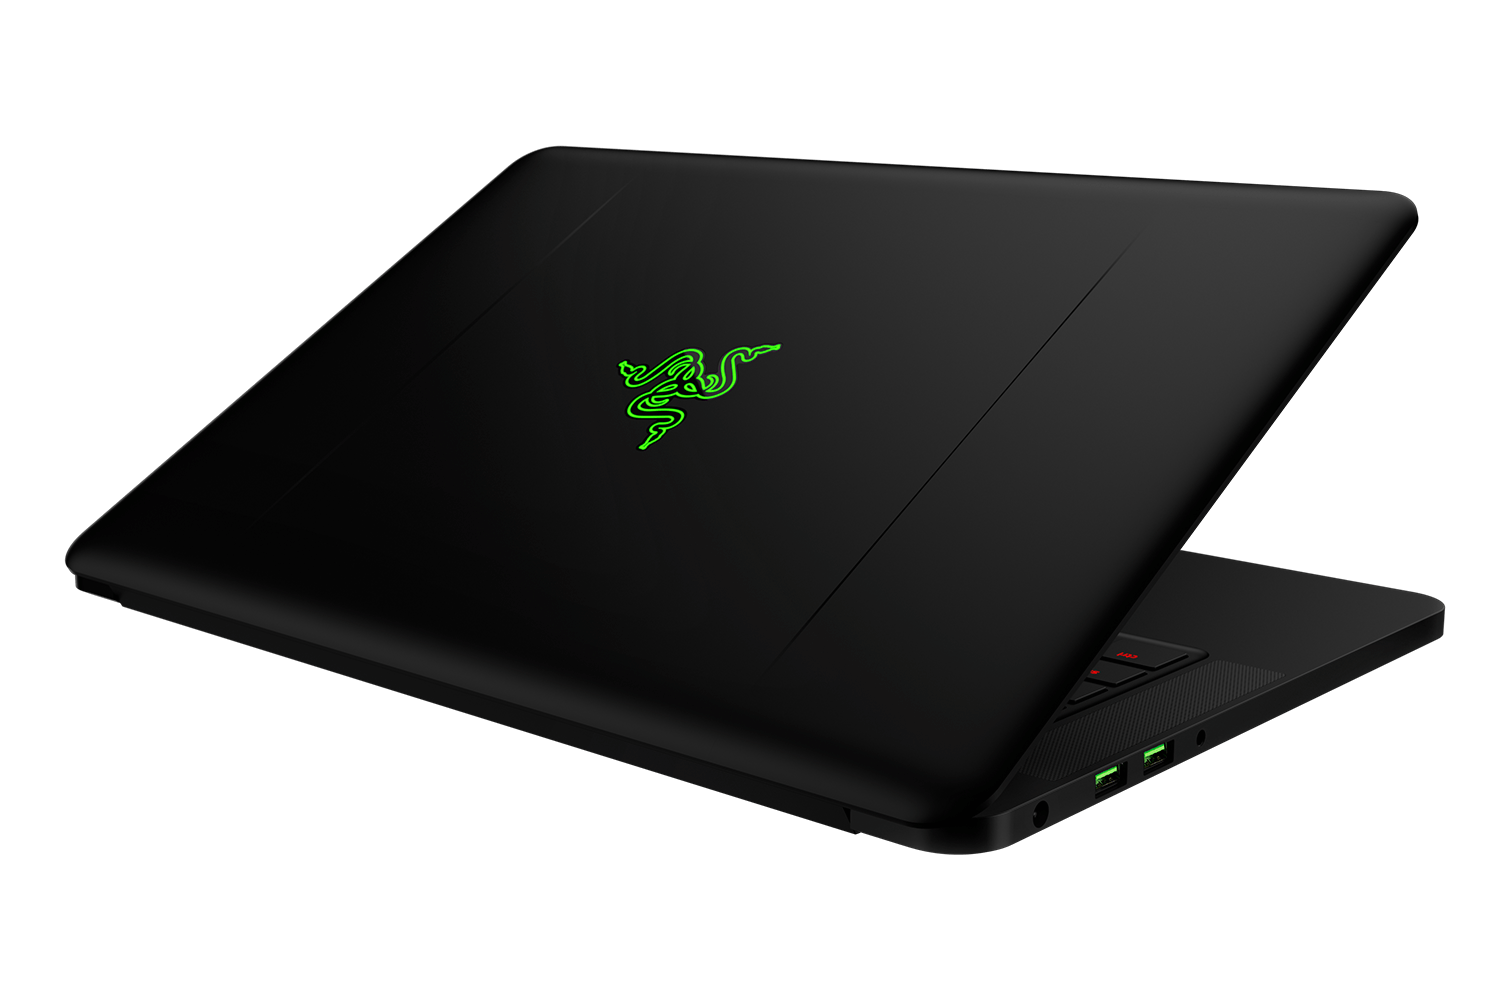 Razer Blade 2016 Review: It Gets Better Every Time